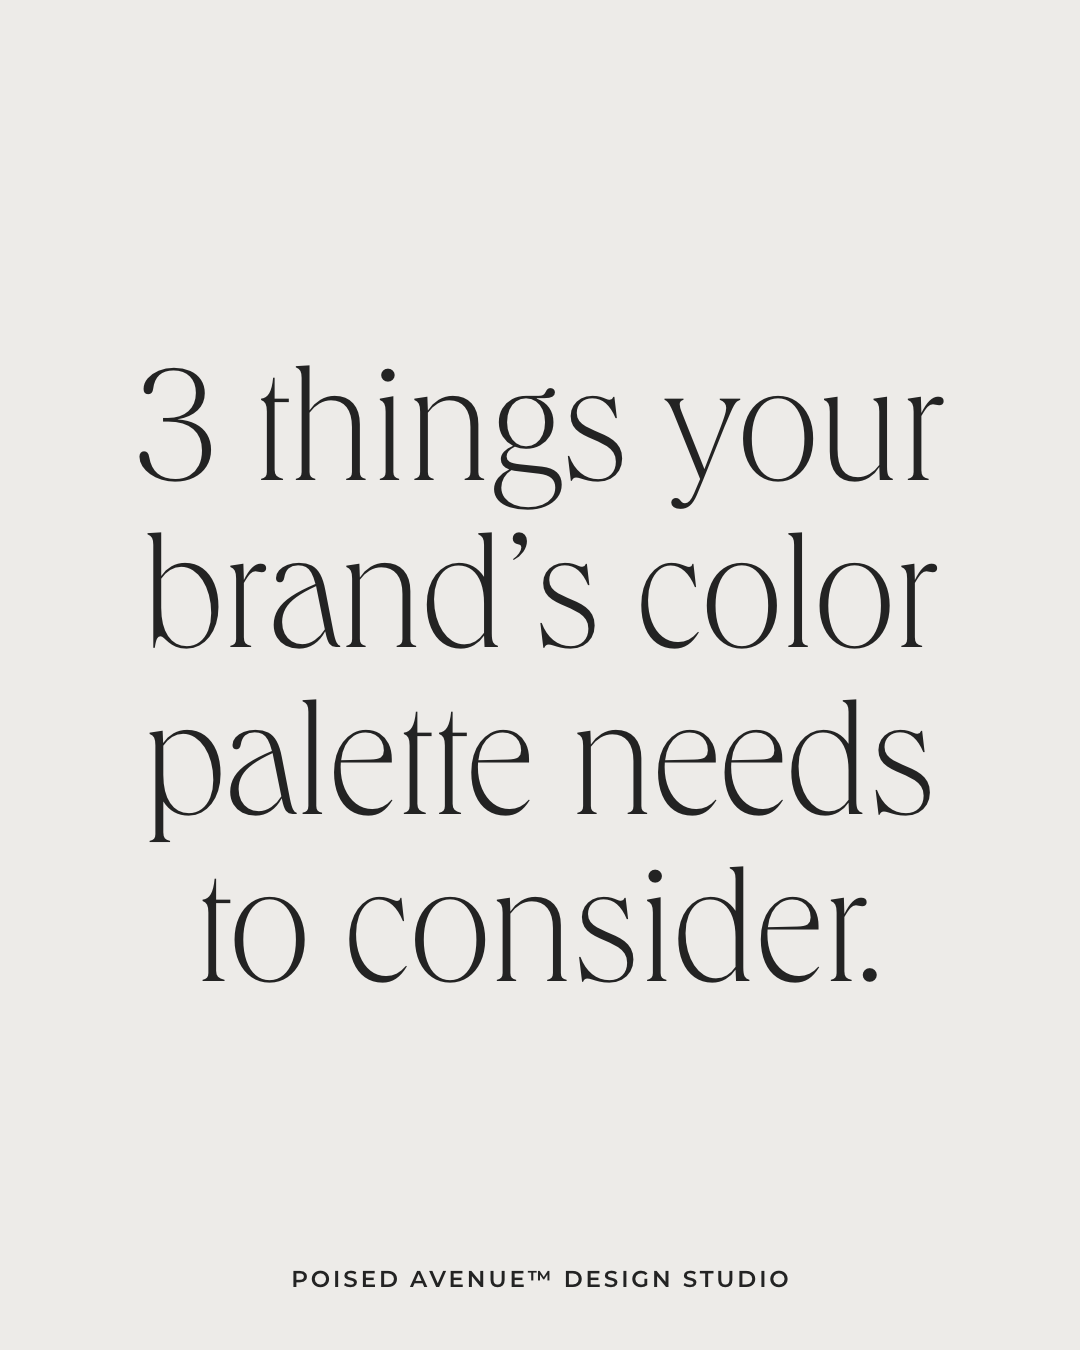 Three things your color palette needs to consider. The science of a professional brand's color palette by Poised Avenue Design Studio.